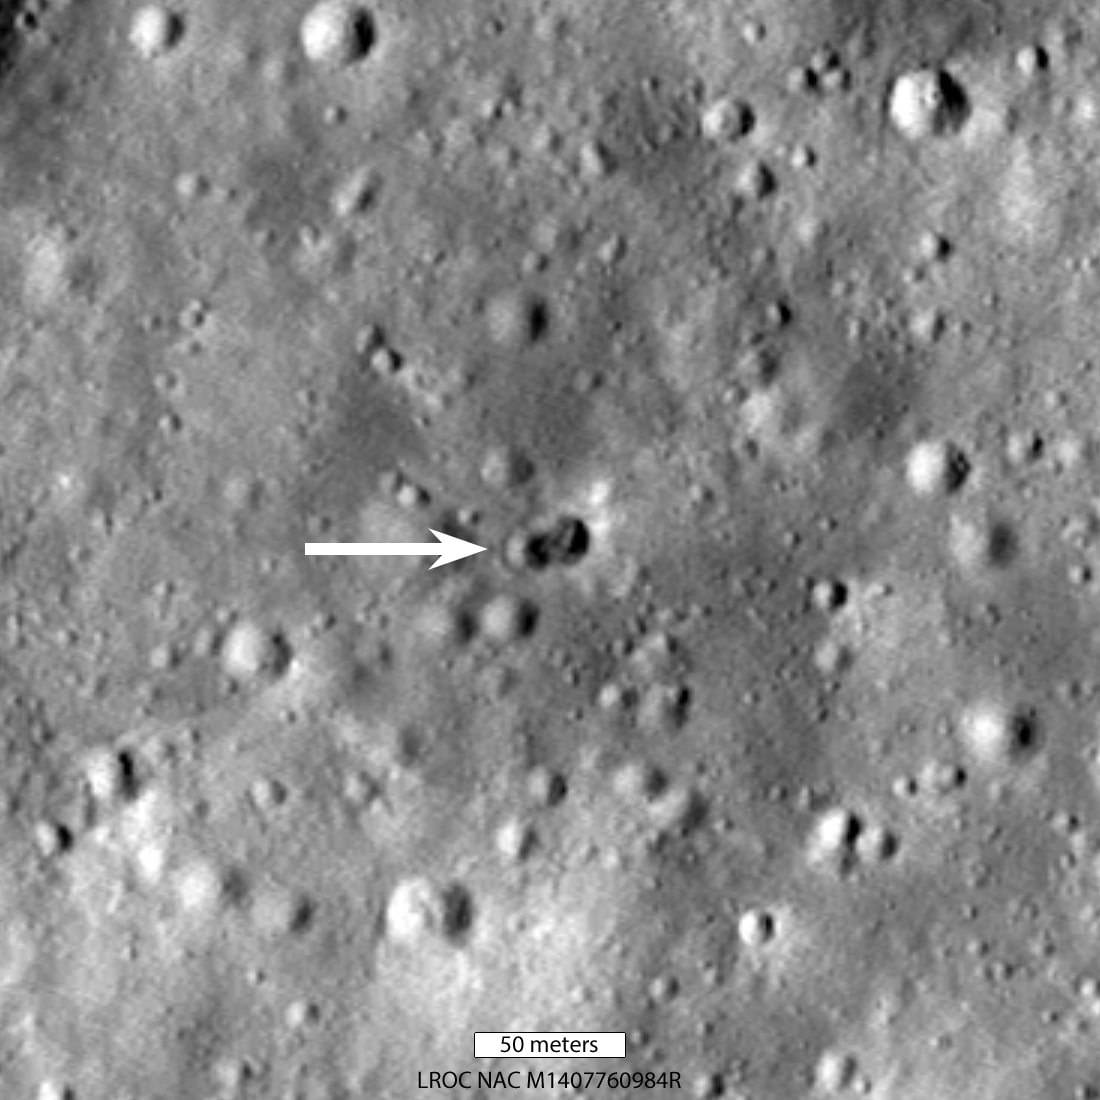 See the crater left by a space junk impact on the moon